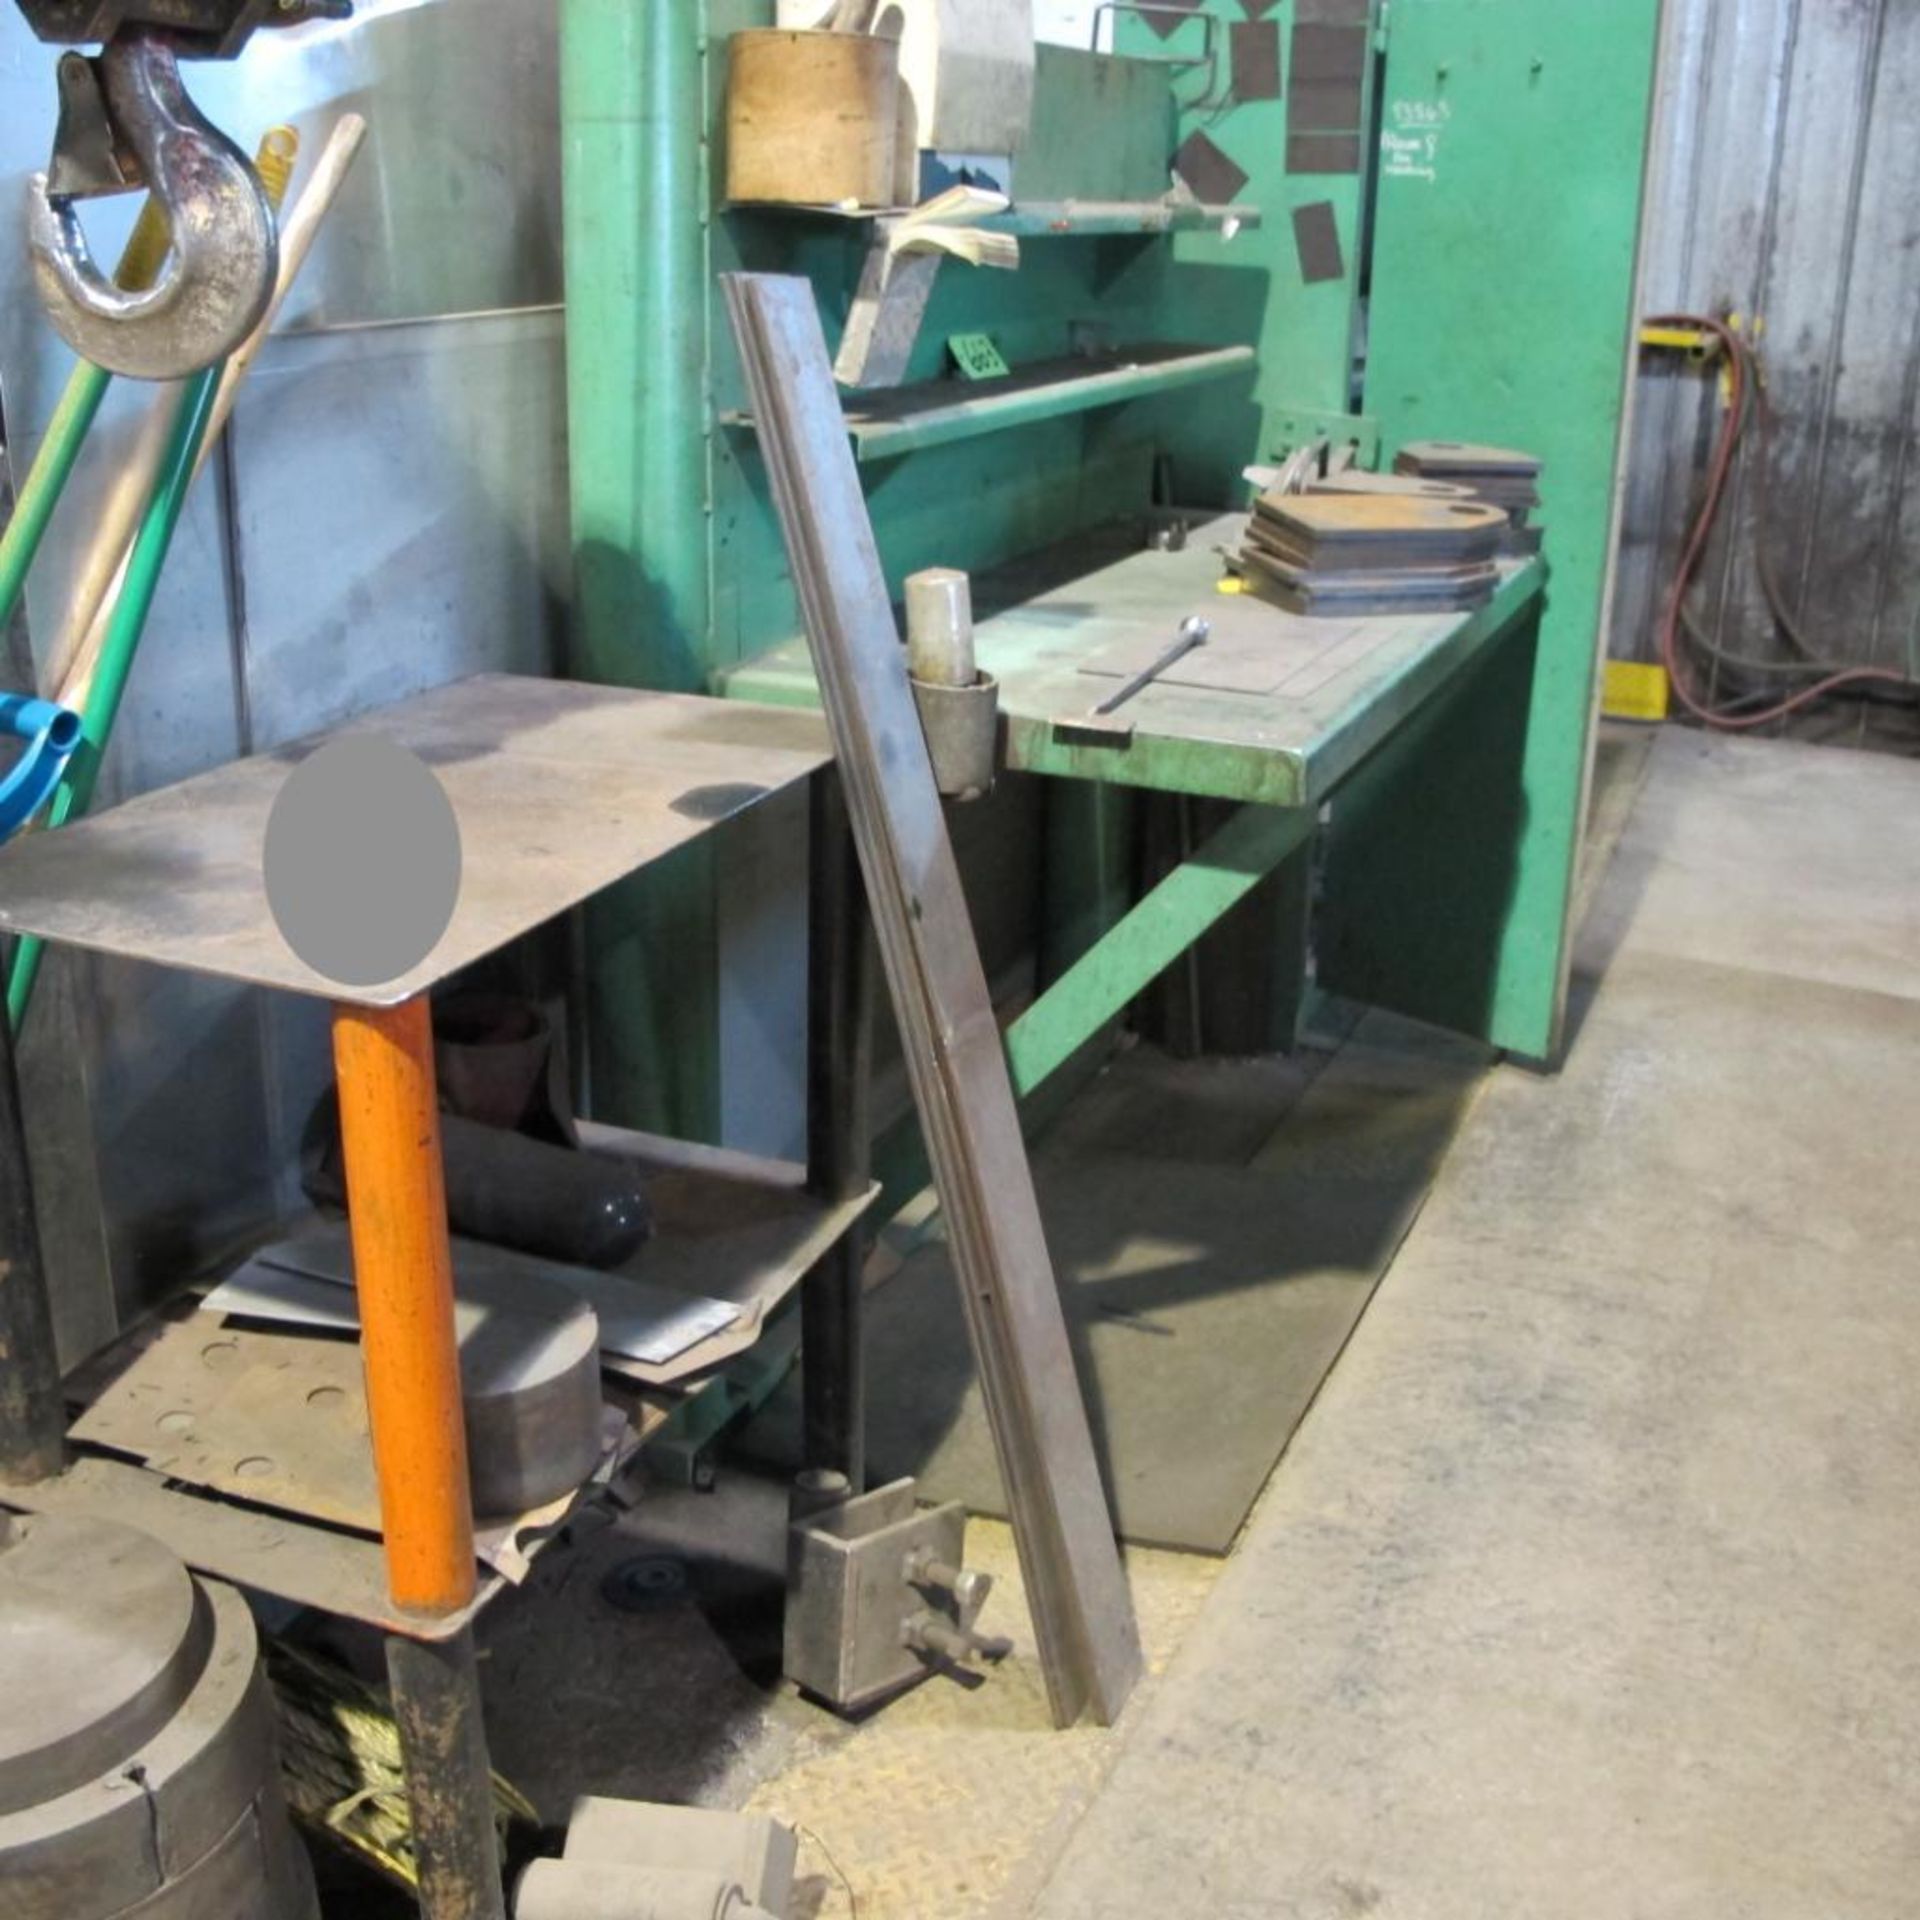 WORK BENCH, 2 DOOR CABINET W/SUPPLIES, SMALL TABLE W/CONTENTS (PLASMA CUTTING BAY) - Image 5 of 5